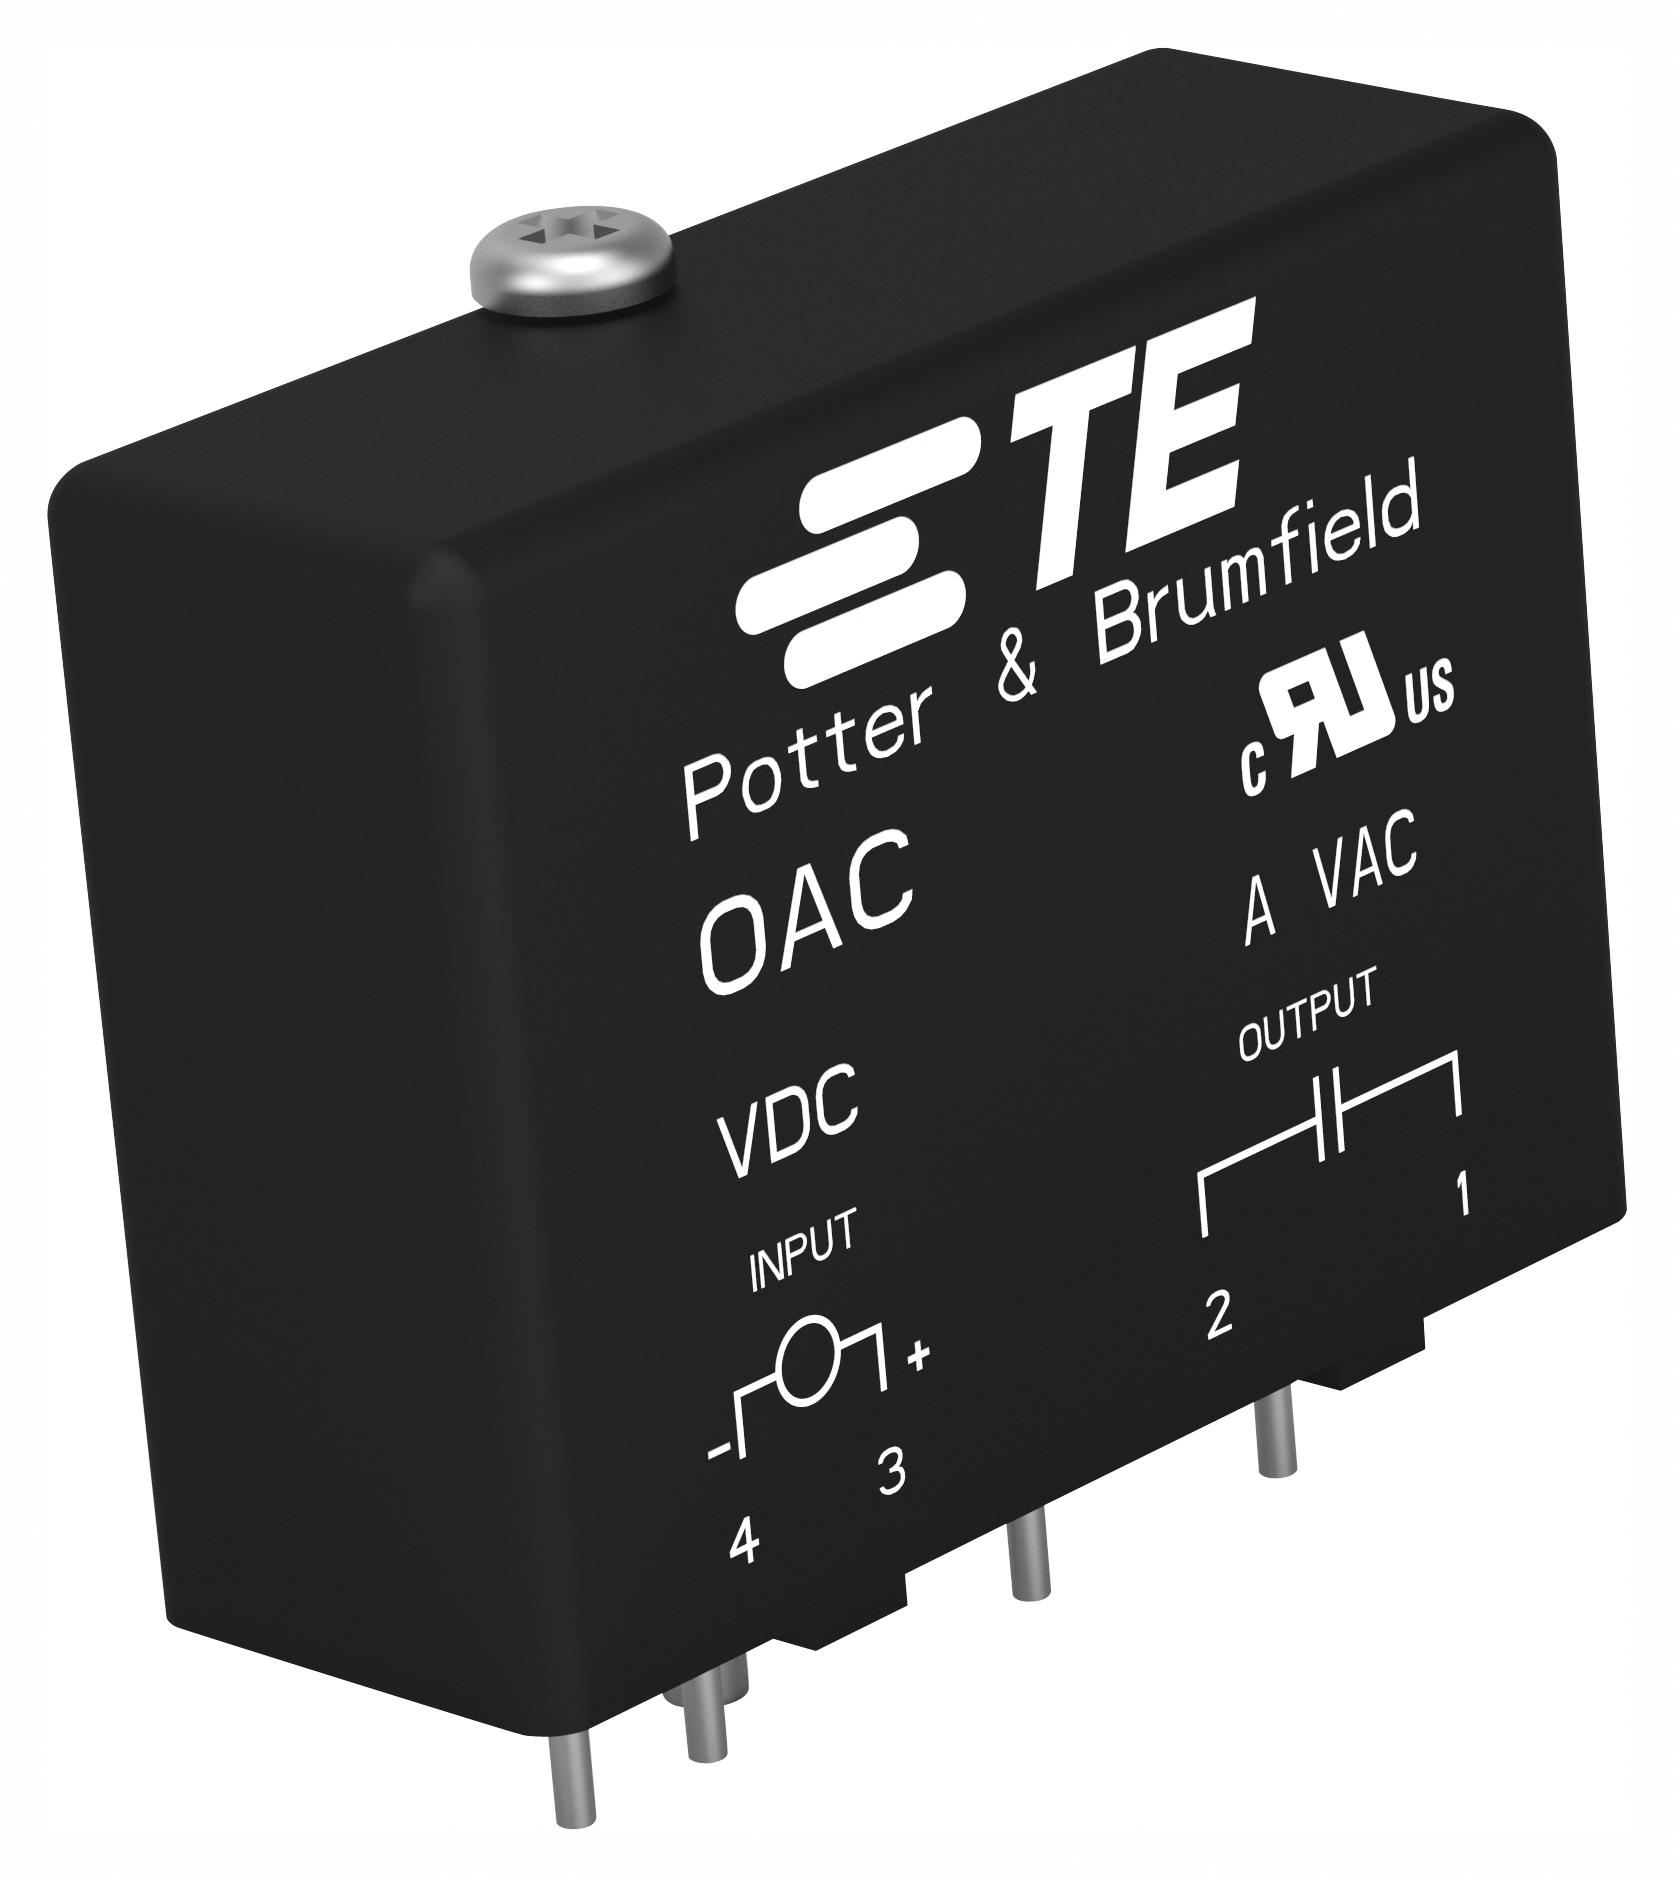 Potter & Brumfield Relays / Te Connectivity Oac-15A Solid State Relay, Spst, 3A, 24-280Vac